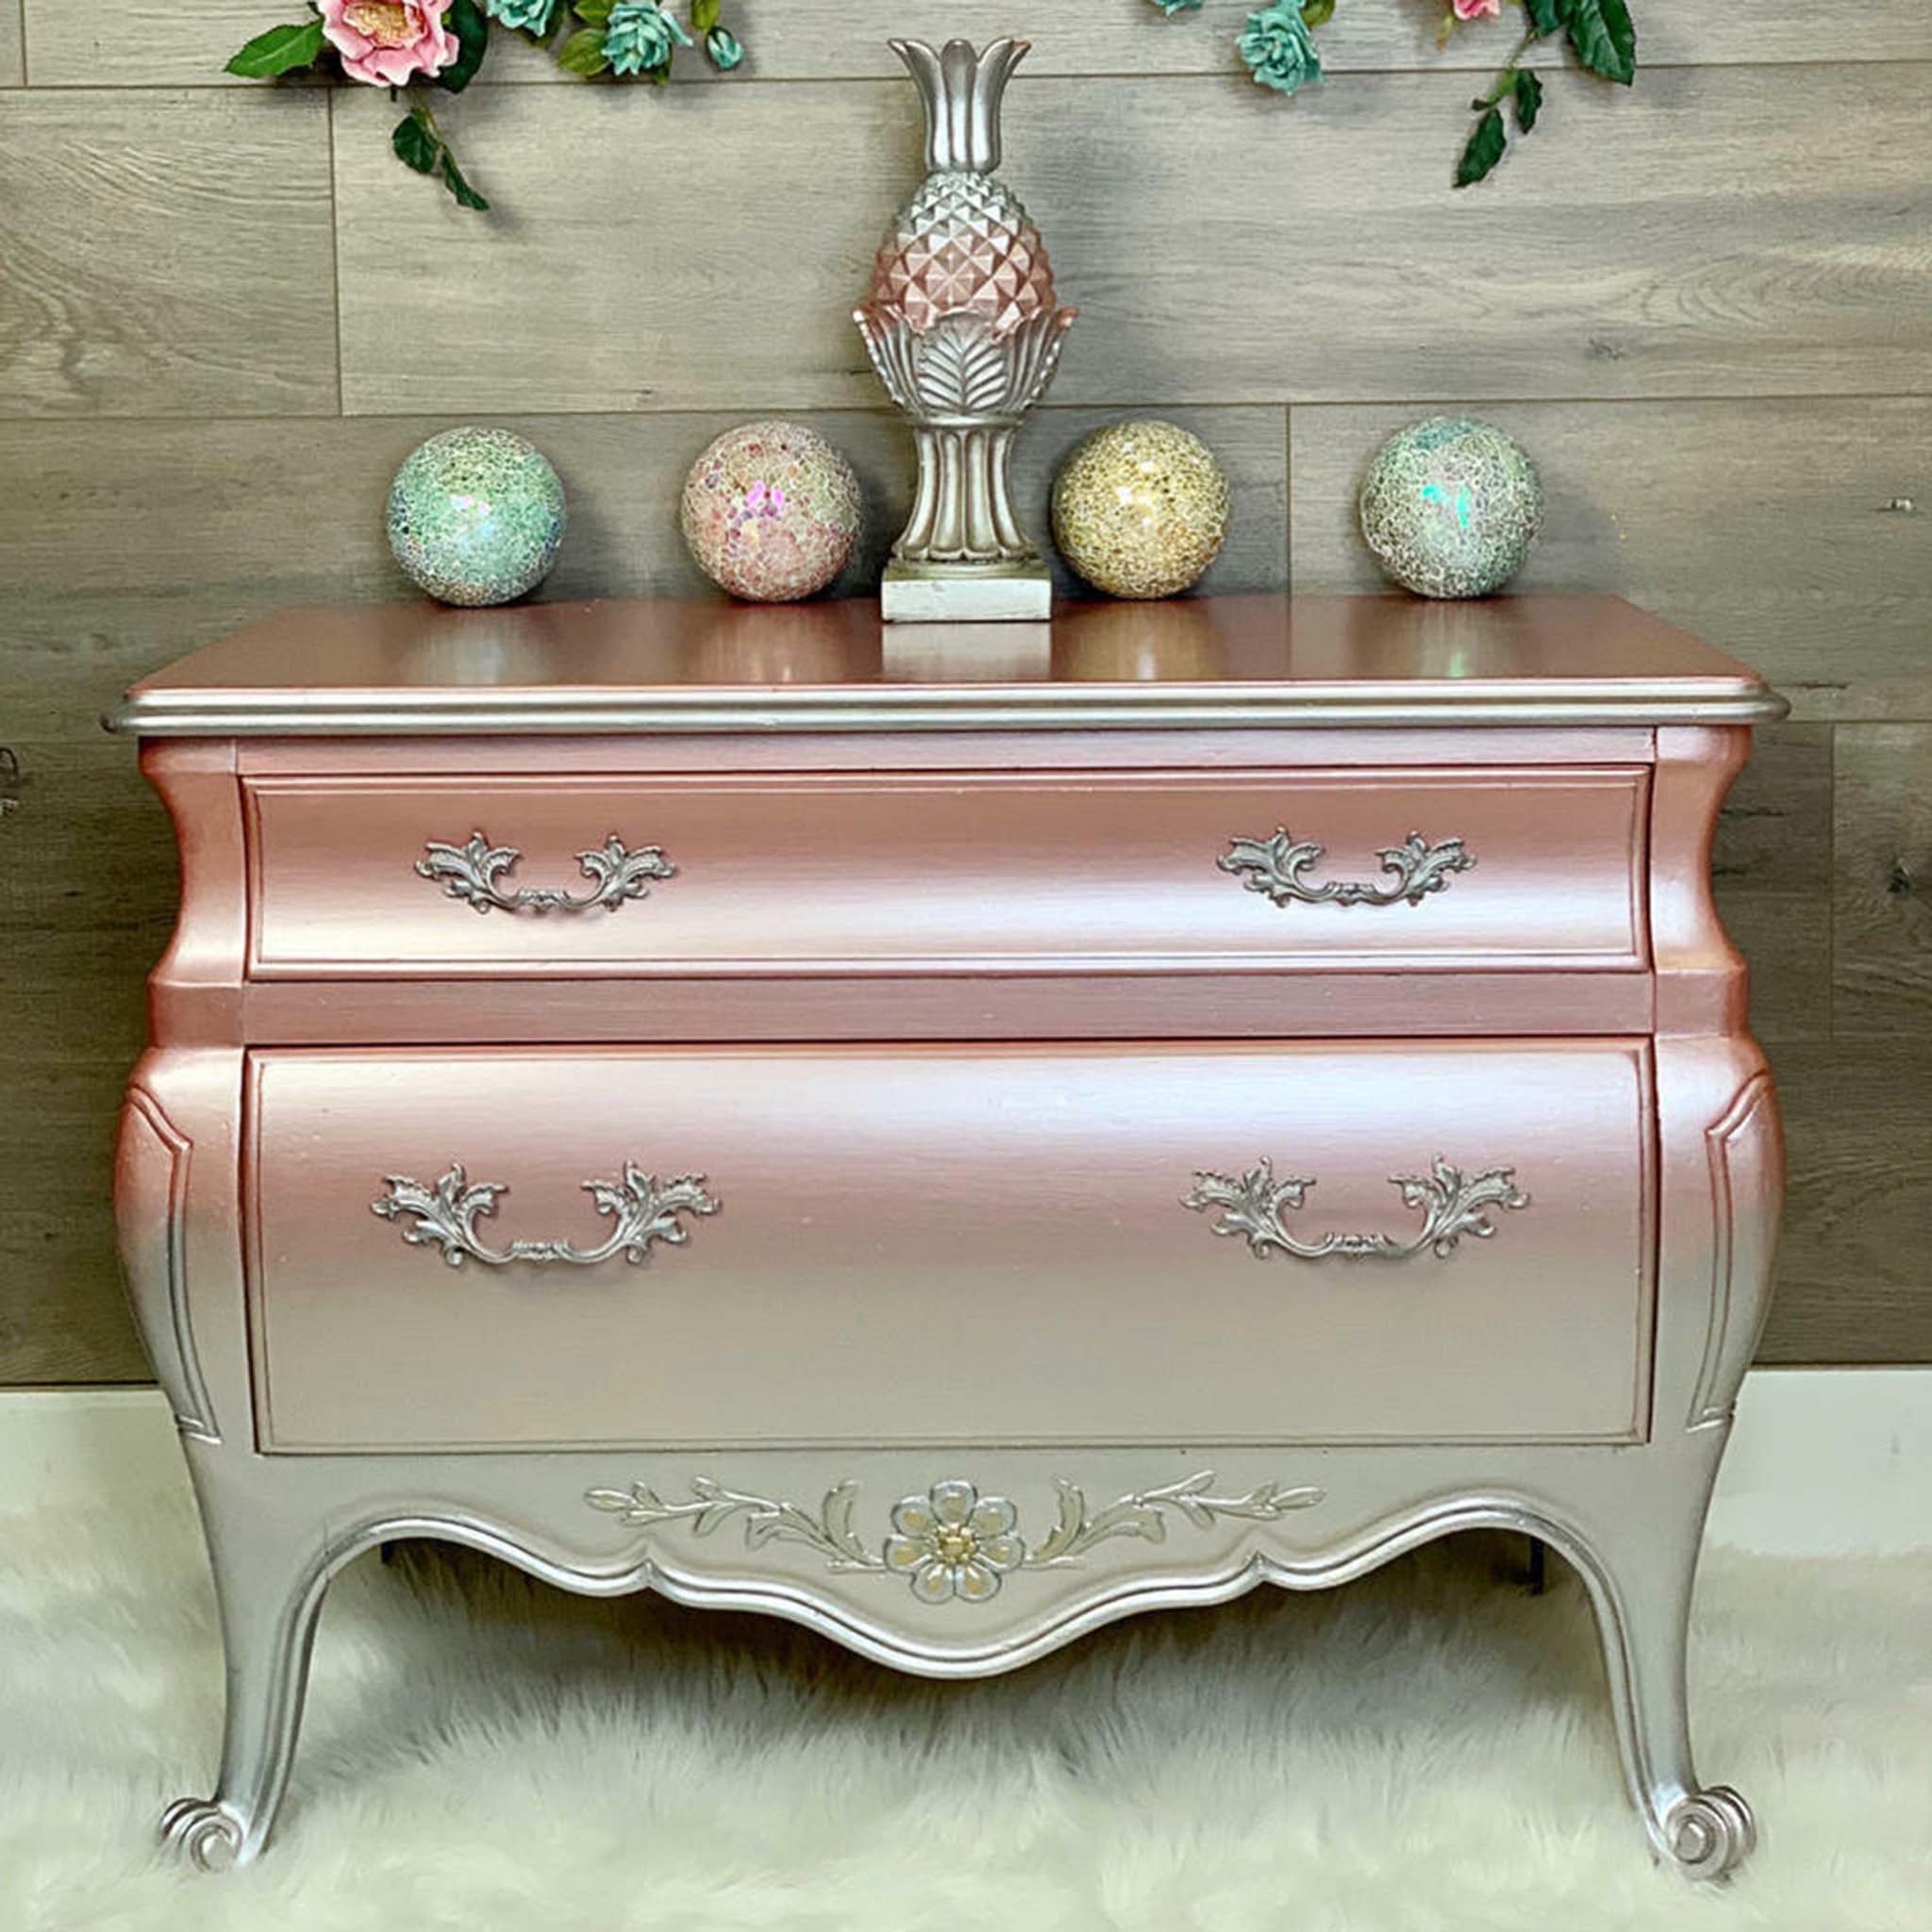 A vintage Bombay style 2-drawer dresser is painted in Dixie Belle's Moonshine Metallics paint in Rozay ombred own to Silver Bullet